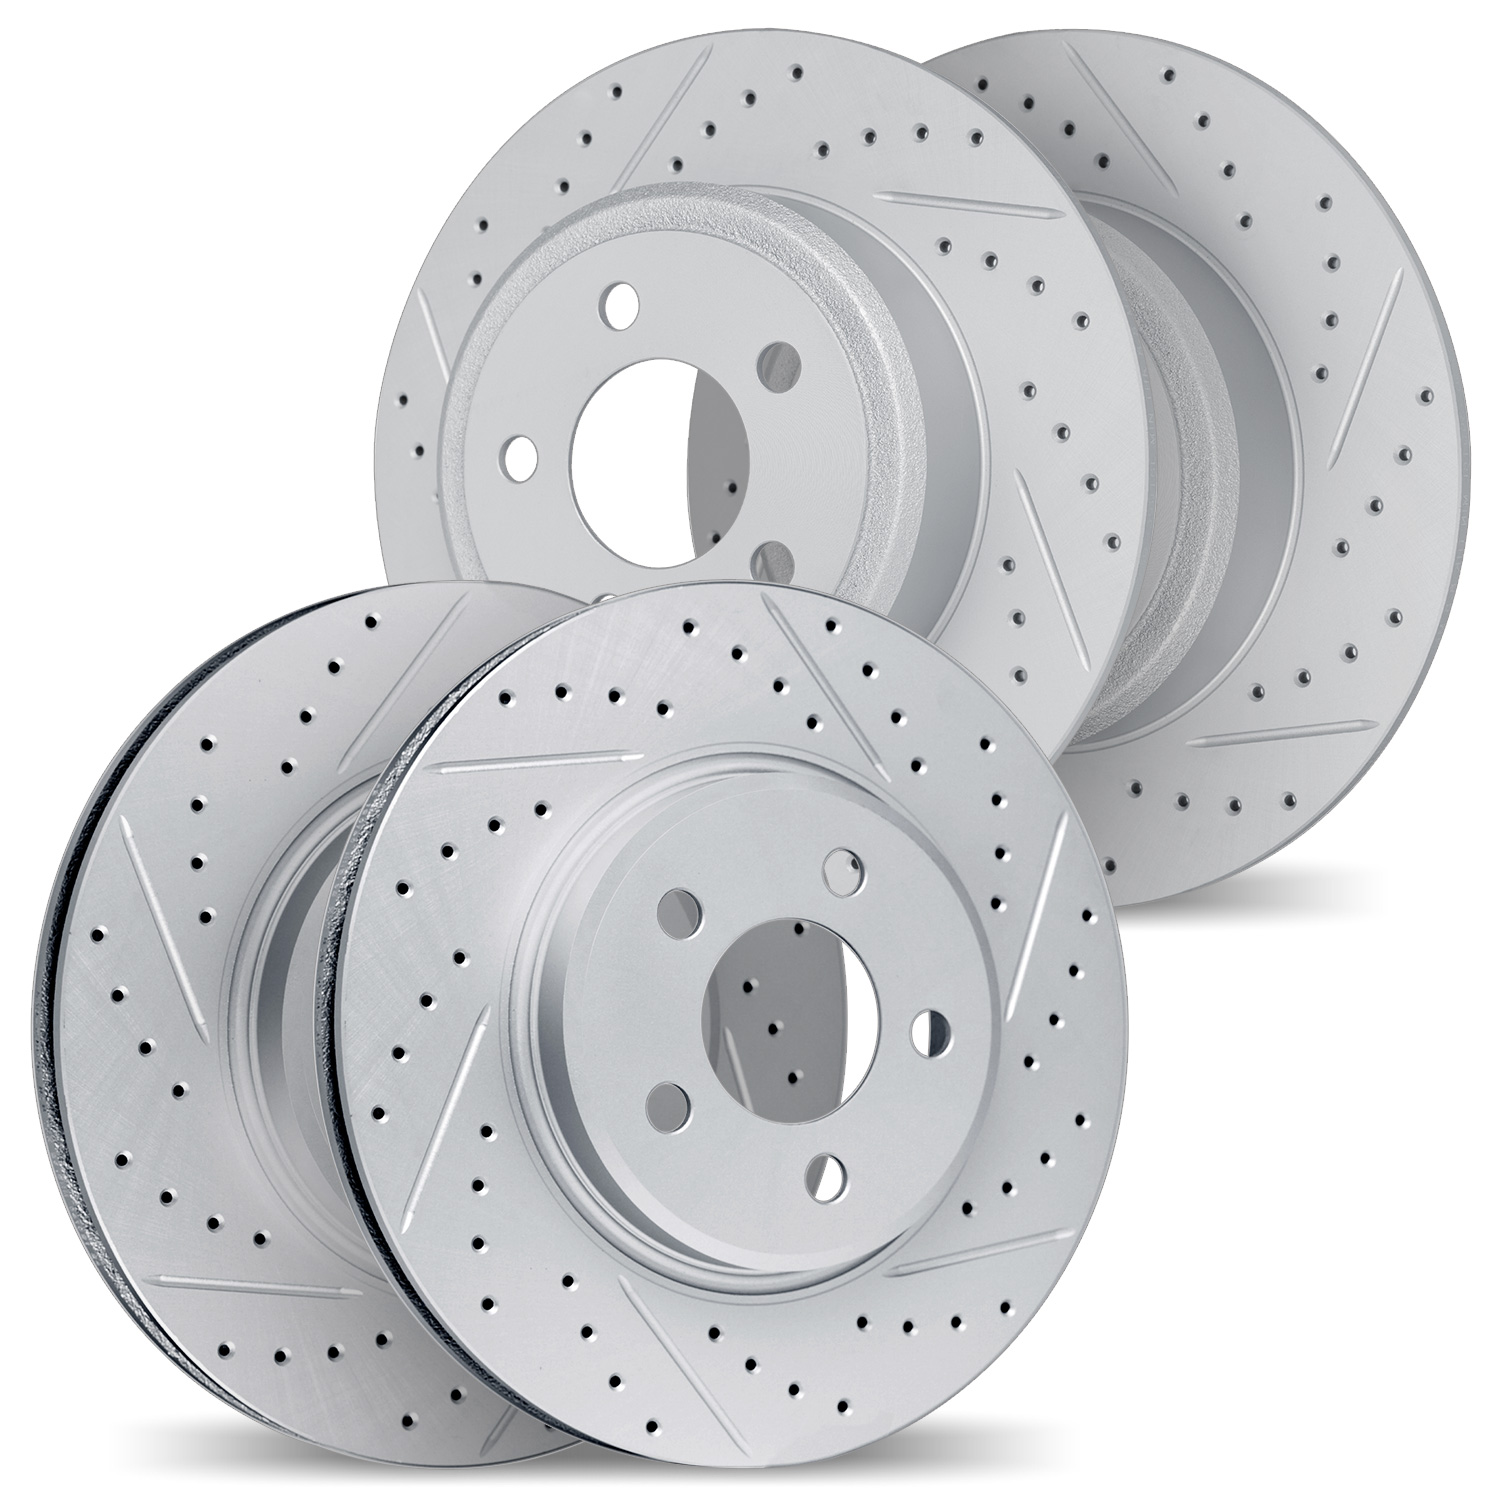 2004-47009 Geoperformance Drilled/Slotted Brake Rotors, 2001-2007 GM, Position: Front and Rear